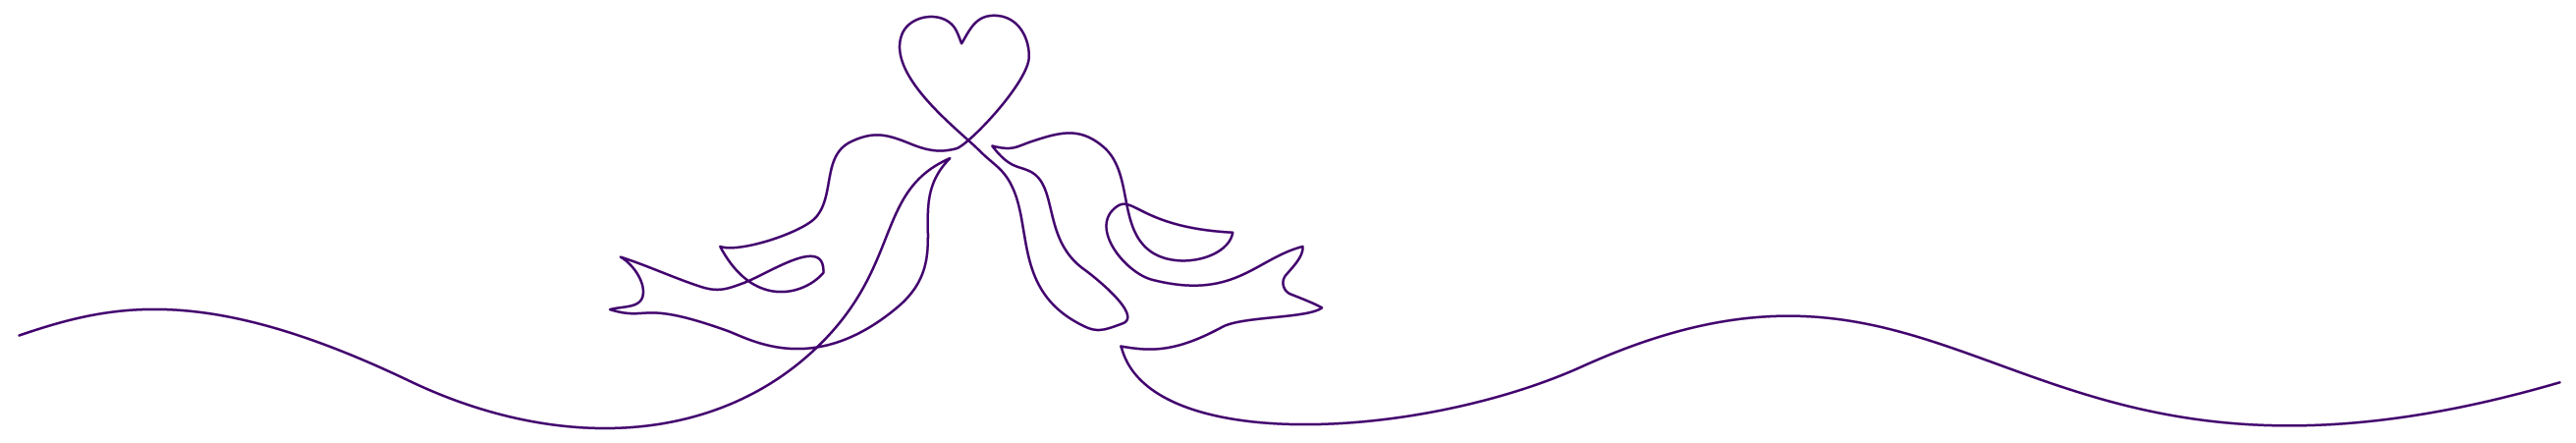 Purple outline graphic of two birds holding a heart